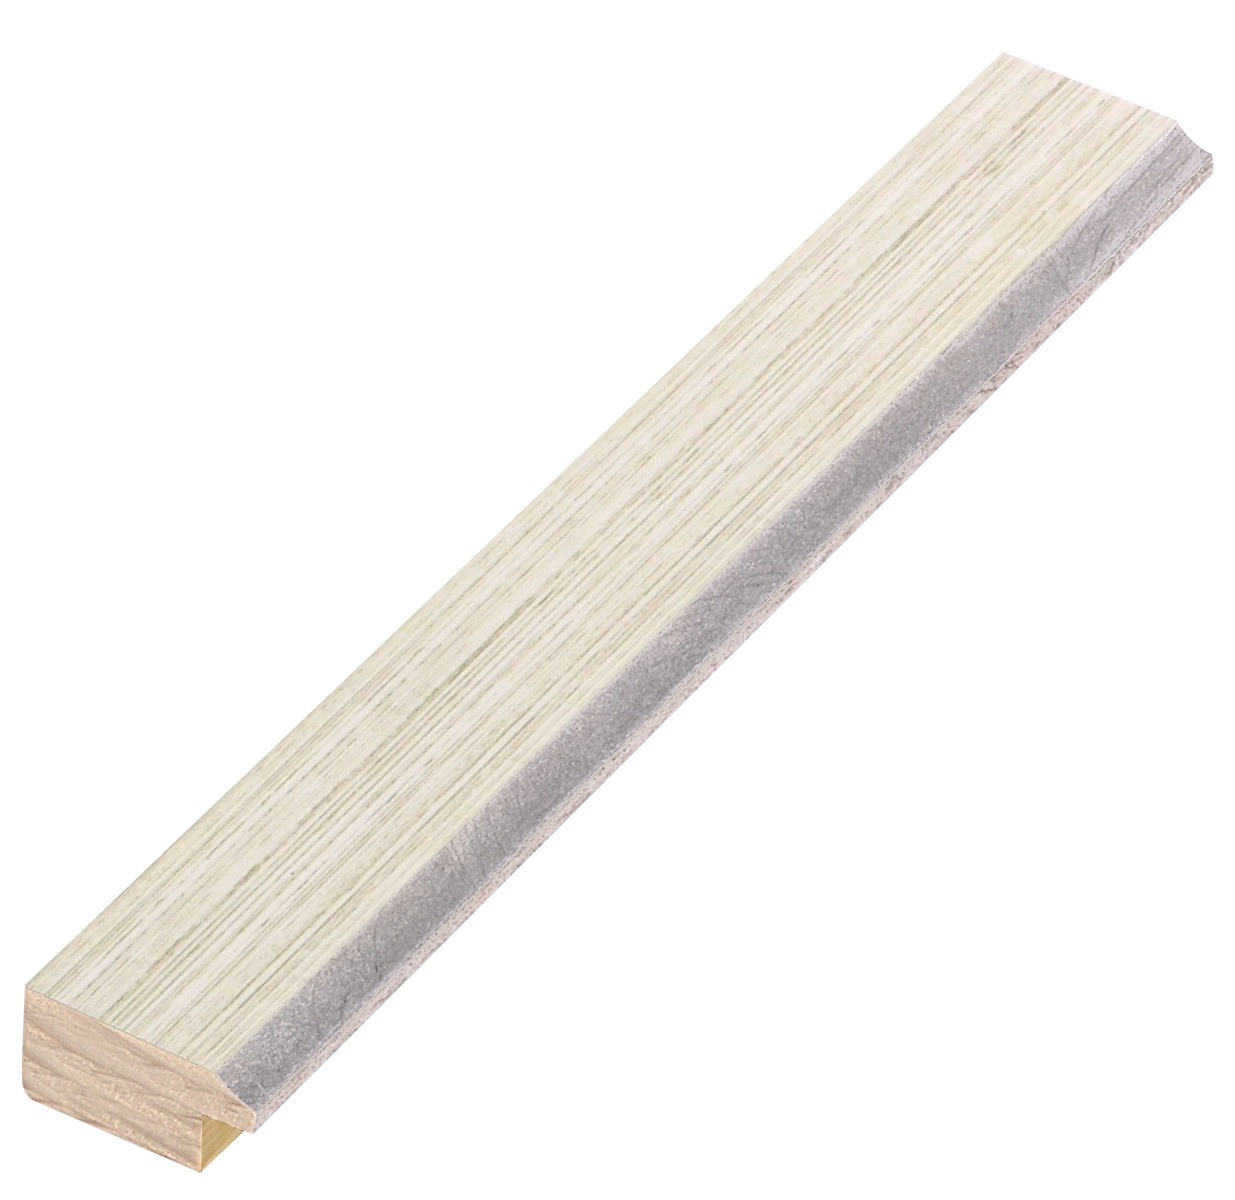 Liner finger-jointed pine 28mm - Cream, silver sight edge - 28CREMARG